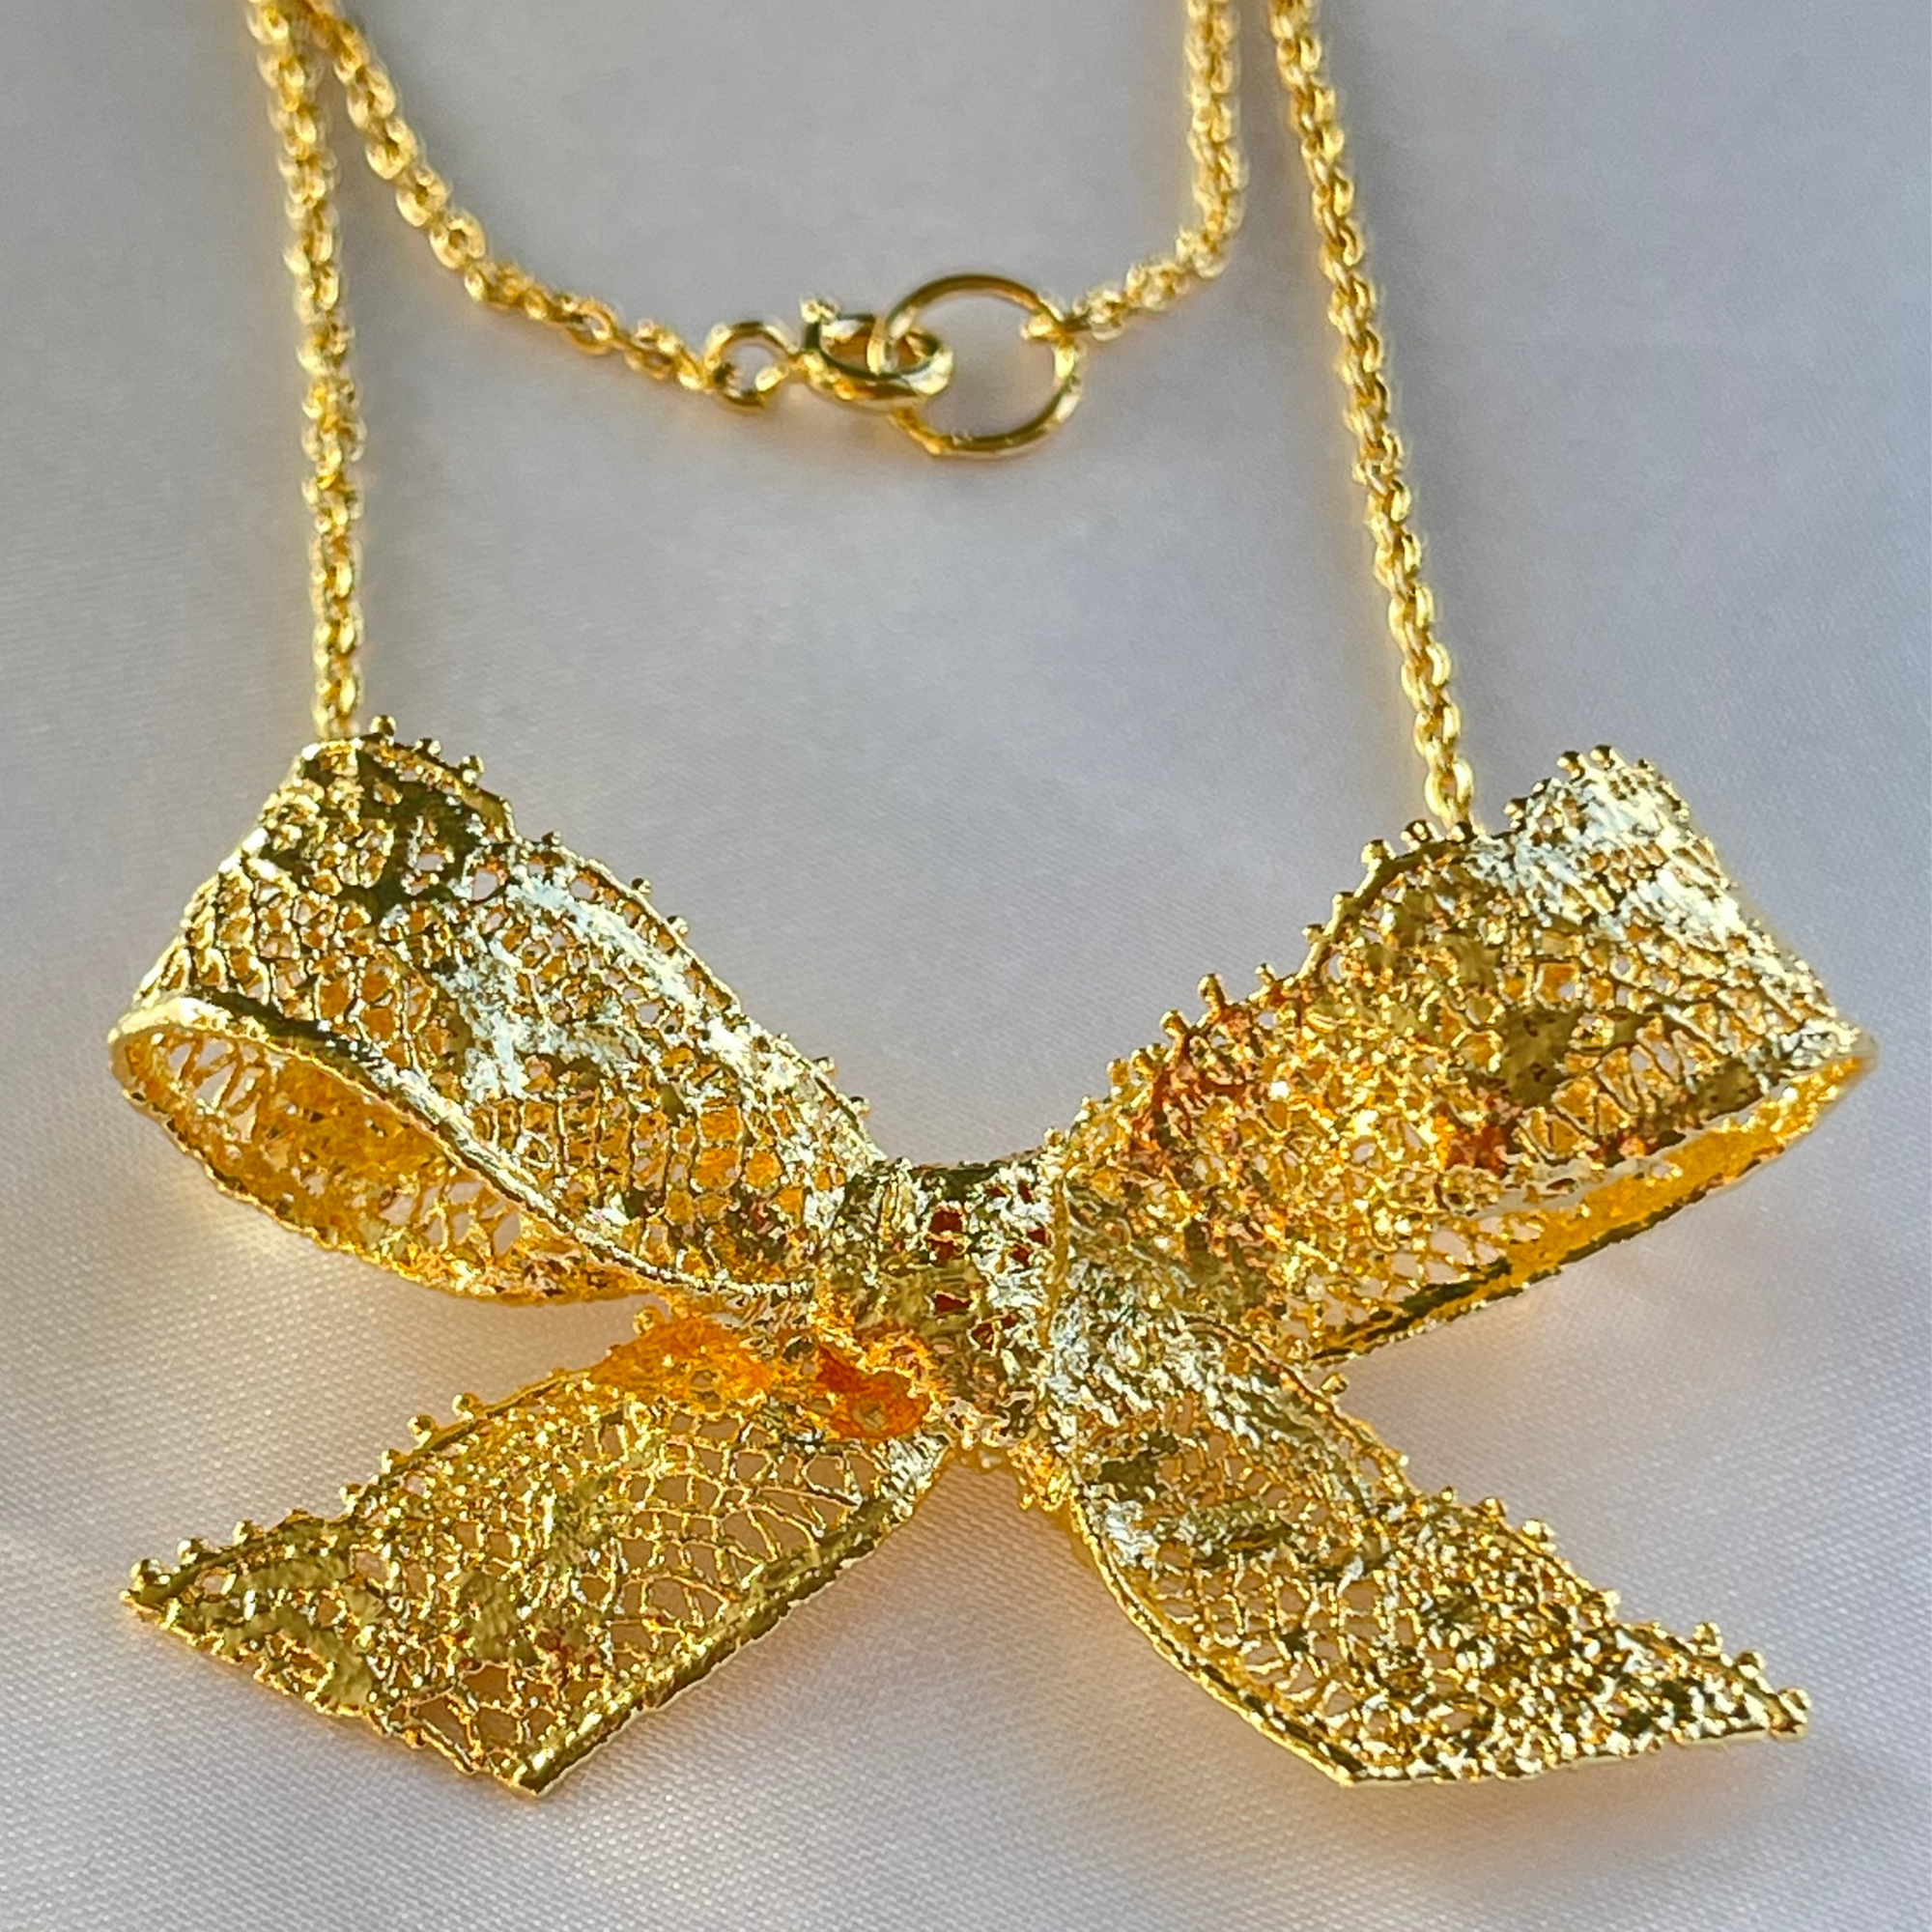 Micheline Lace Bow Necklace in 24K Gold